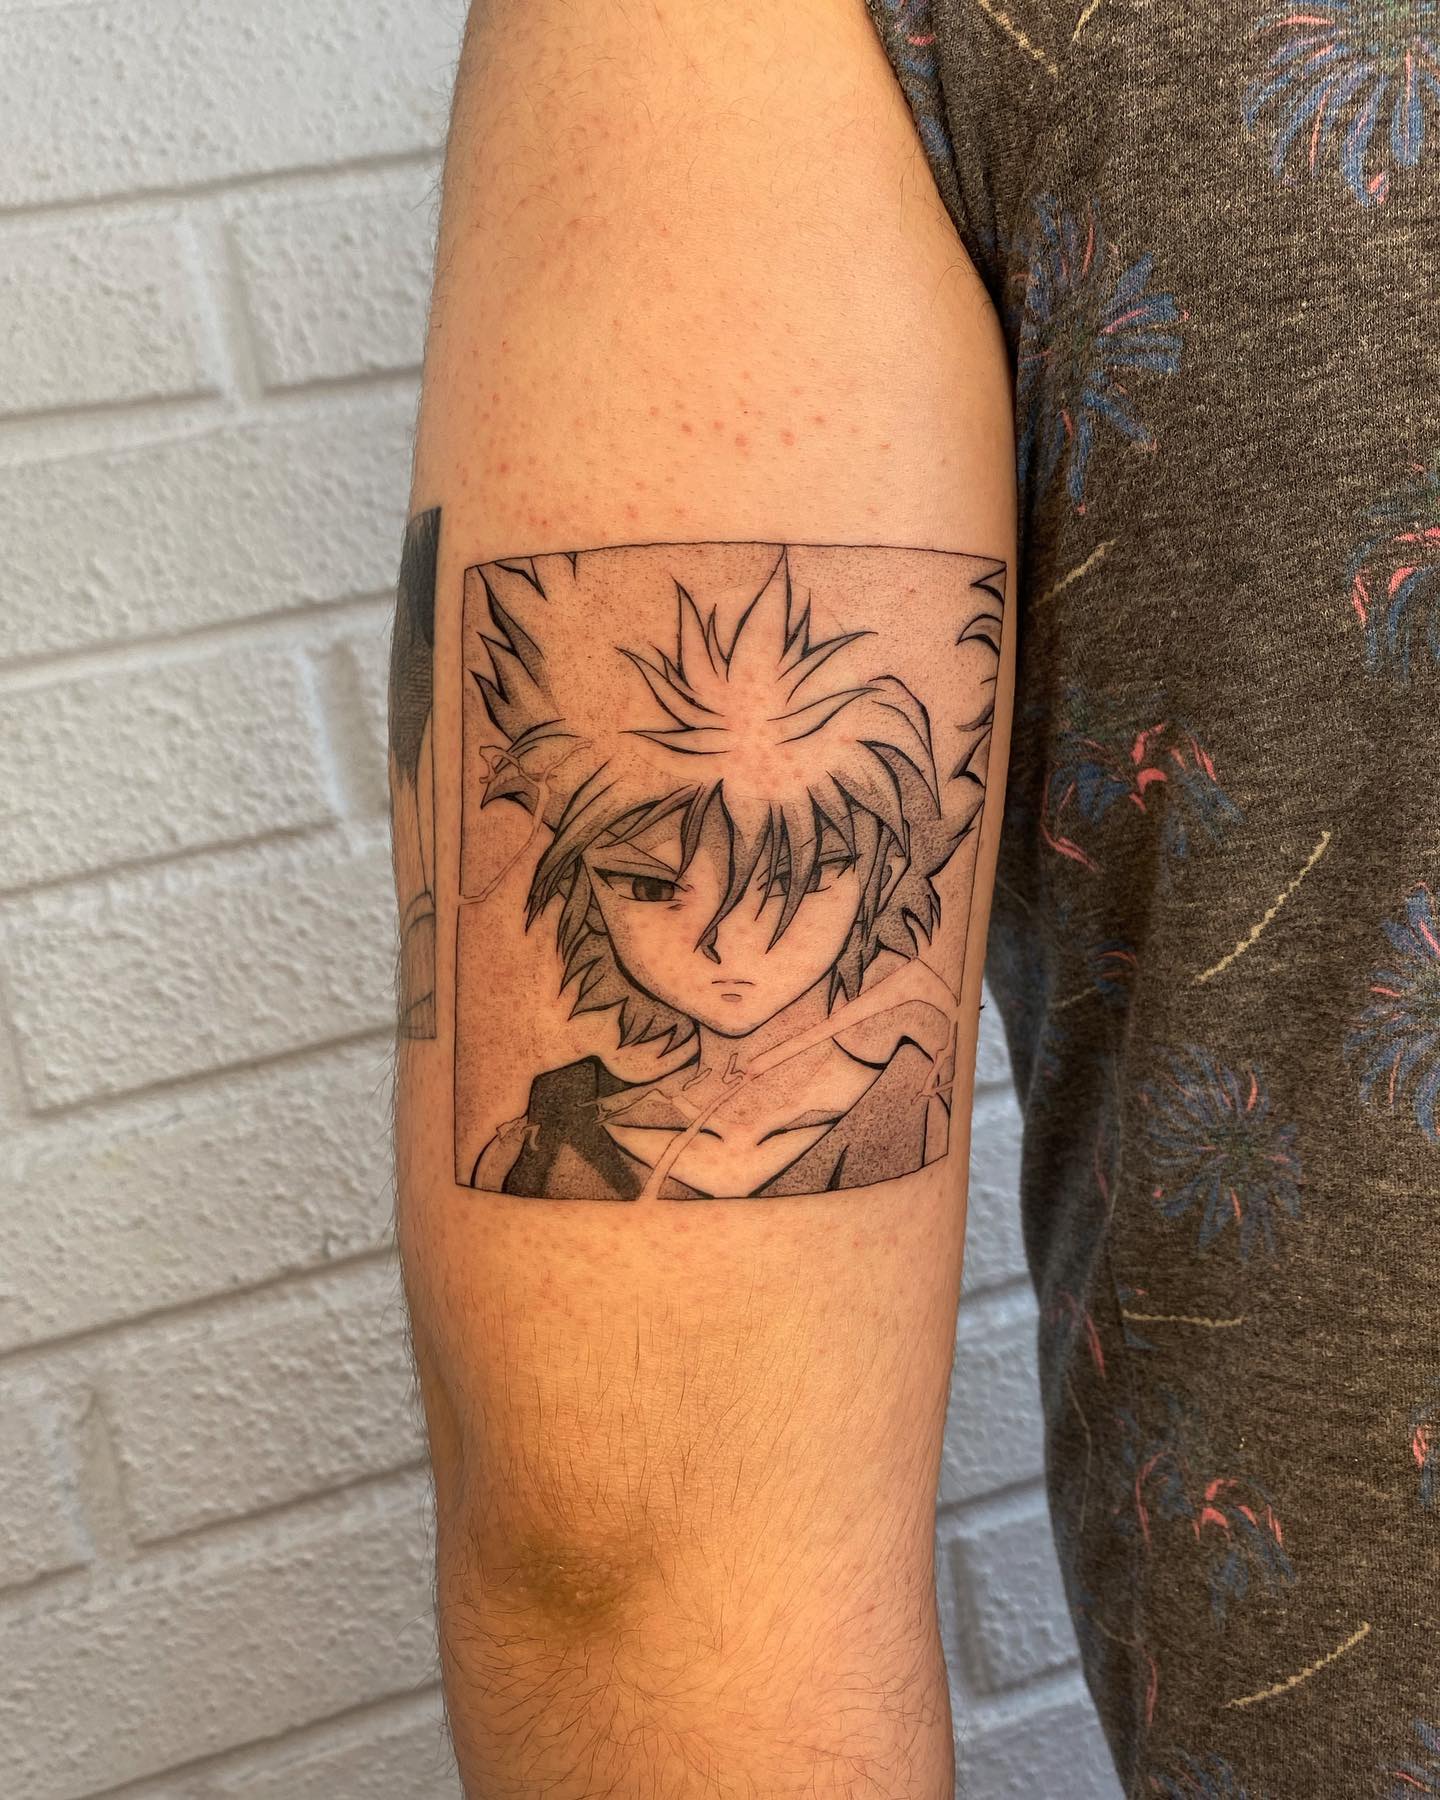 Immy Tattoo on Twitter Still very fresh near the top but got to smash out  this HxH piece for rhiannonxro  was a longggg 10hours and still got some  more to add